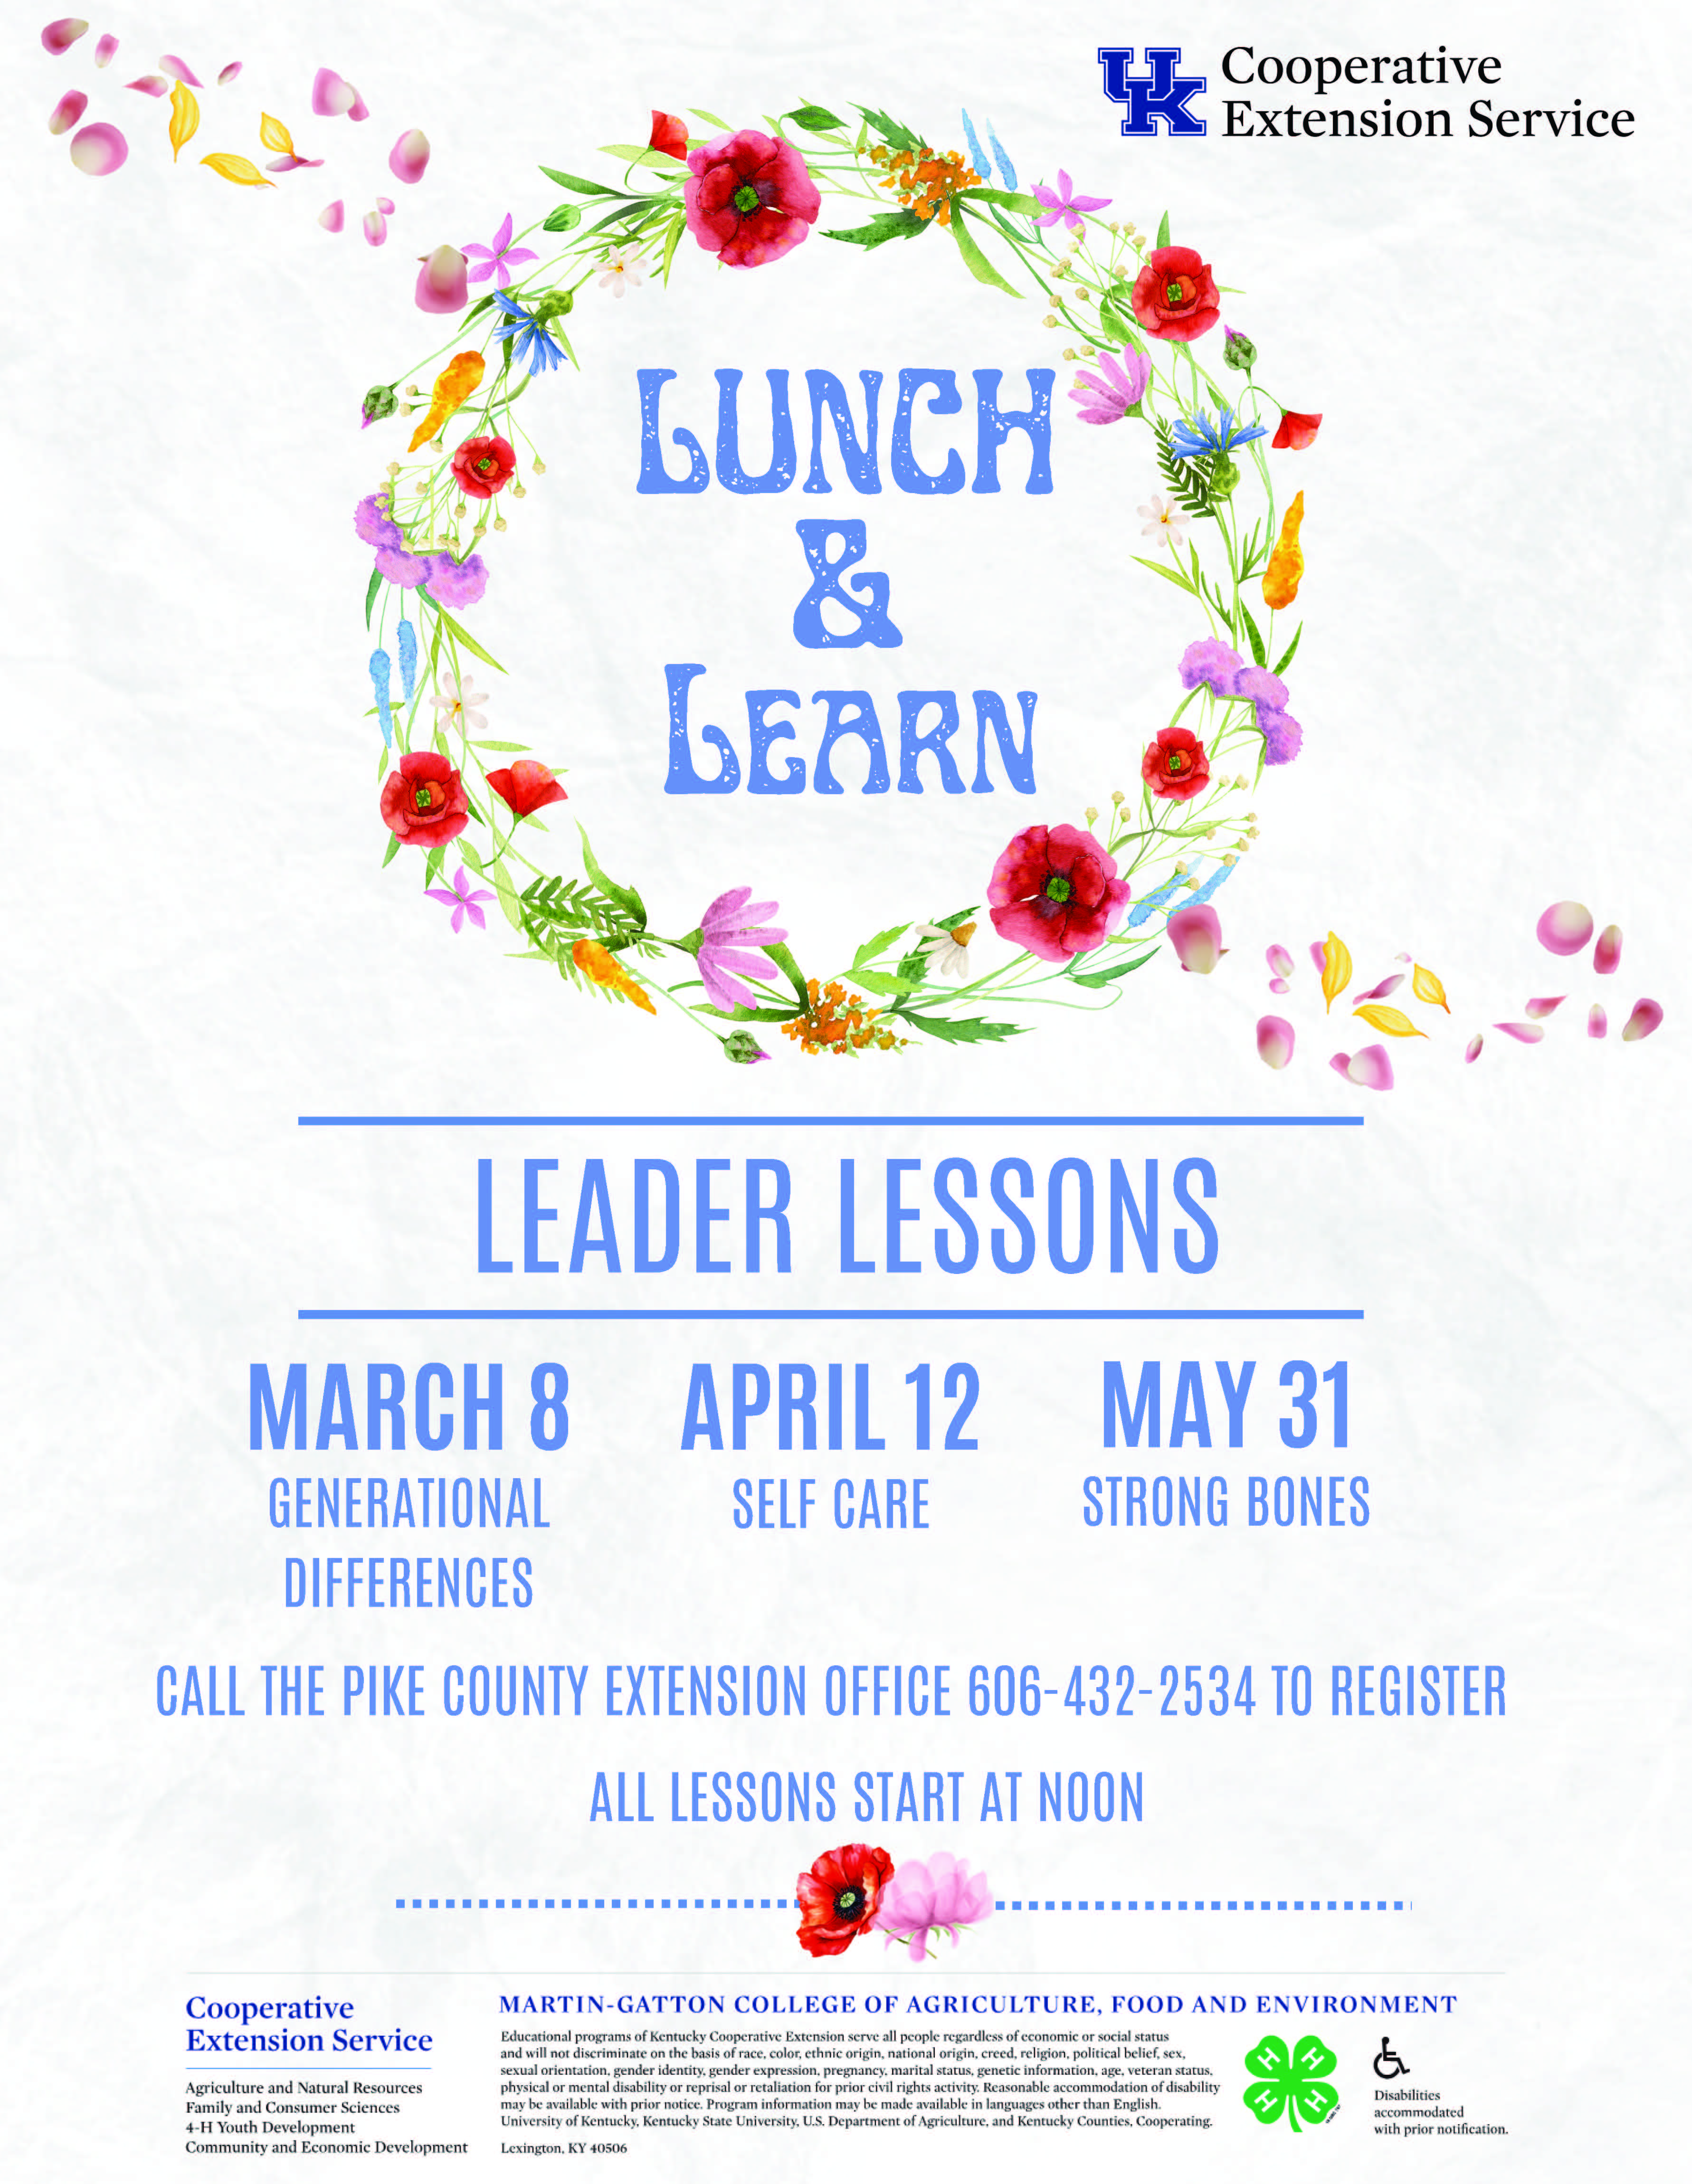 Lunch & Learn May 31